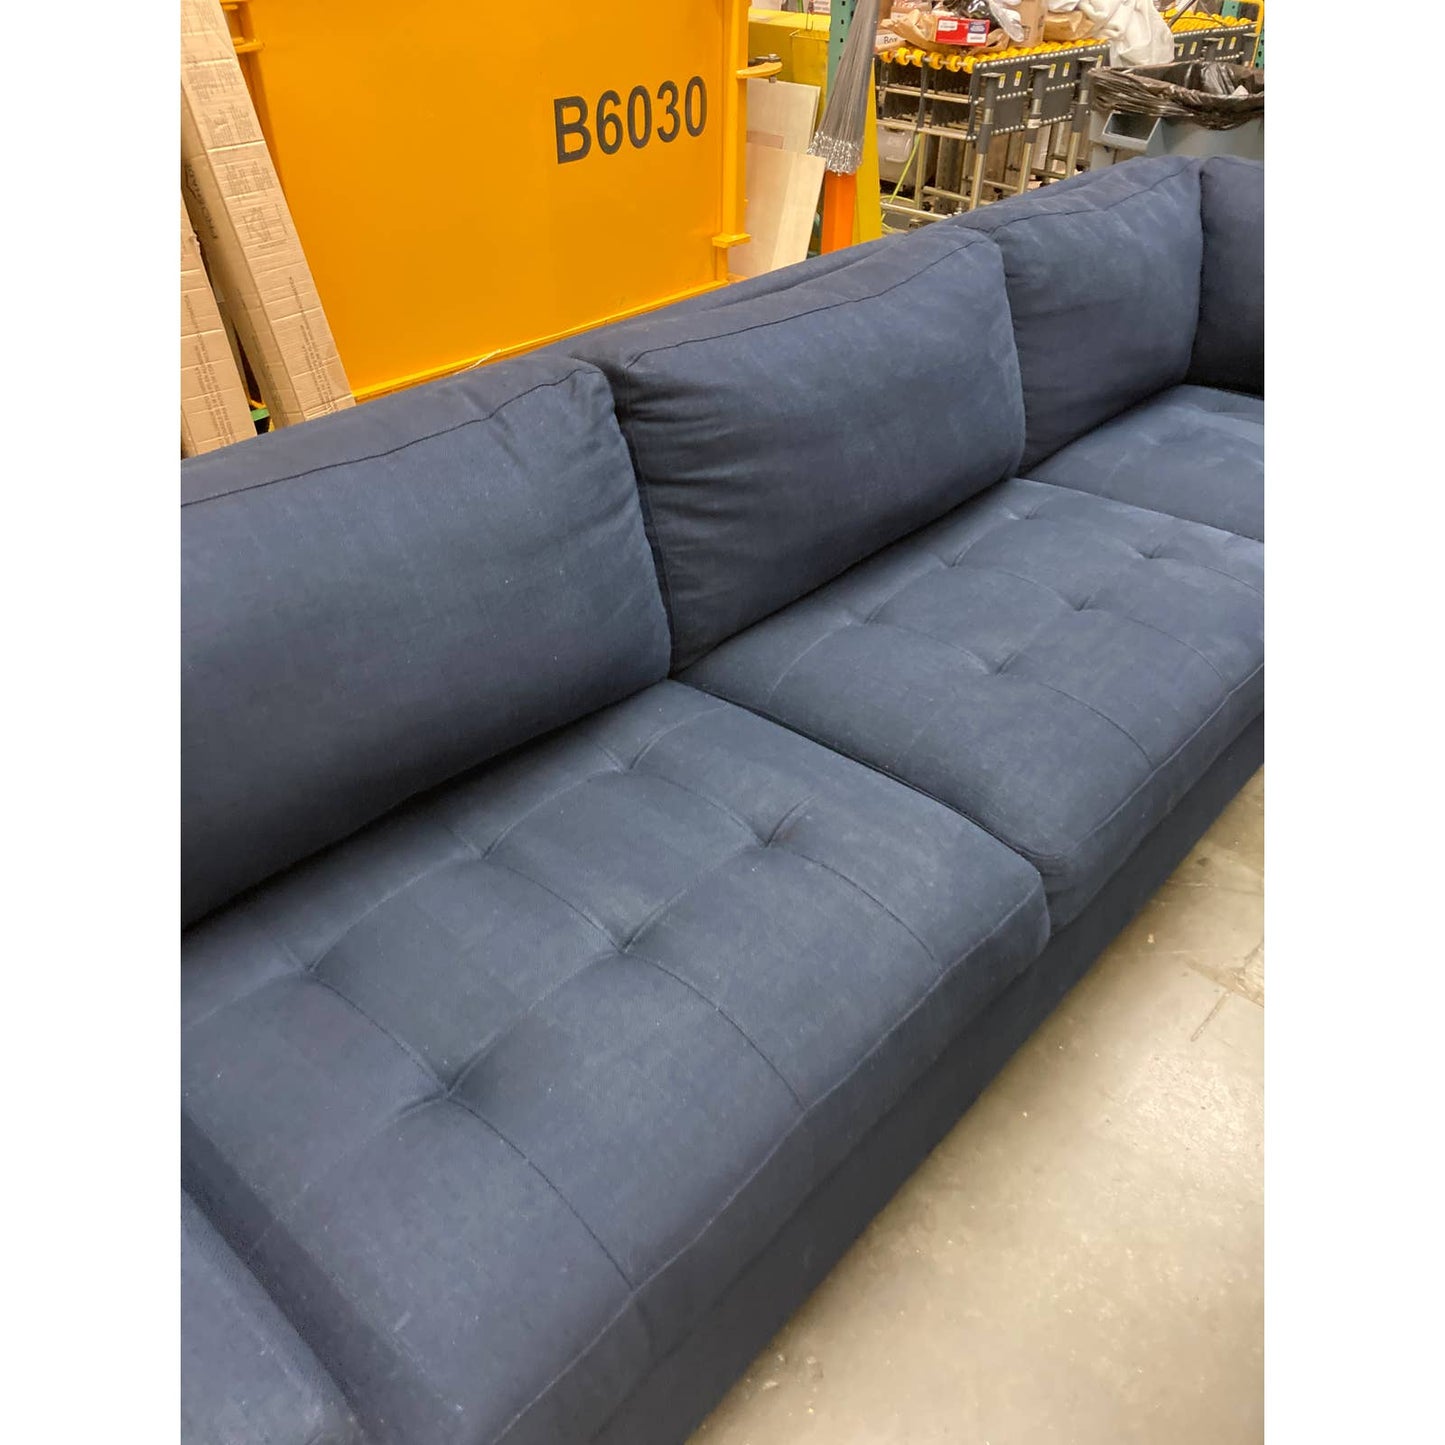 Costco - Thomasville Miles Fabric Sectional with Storage Ottoman - Retail $1799